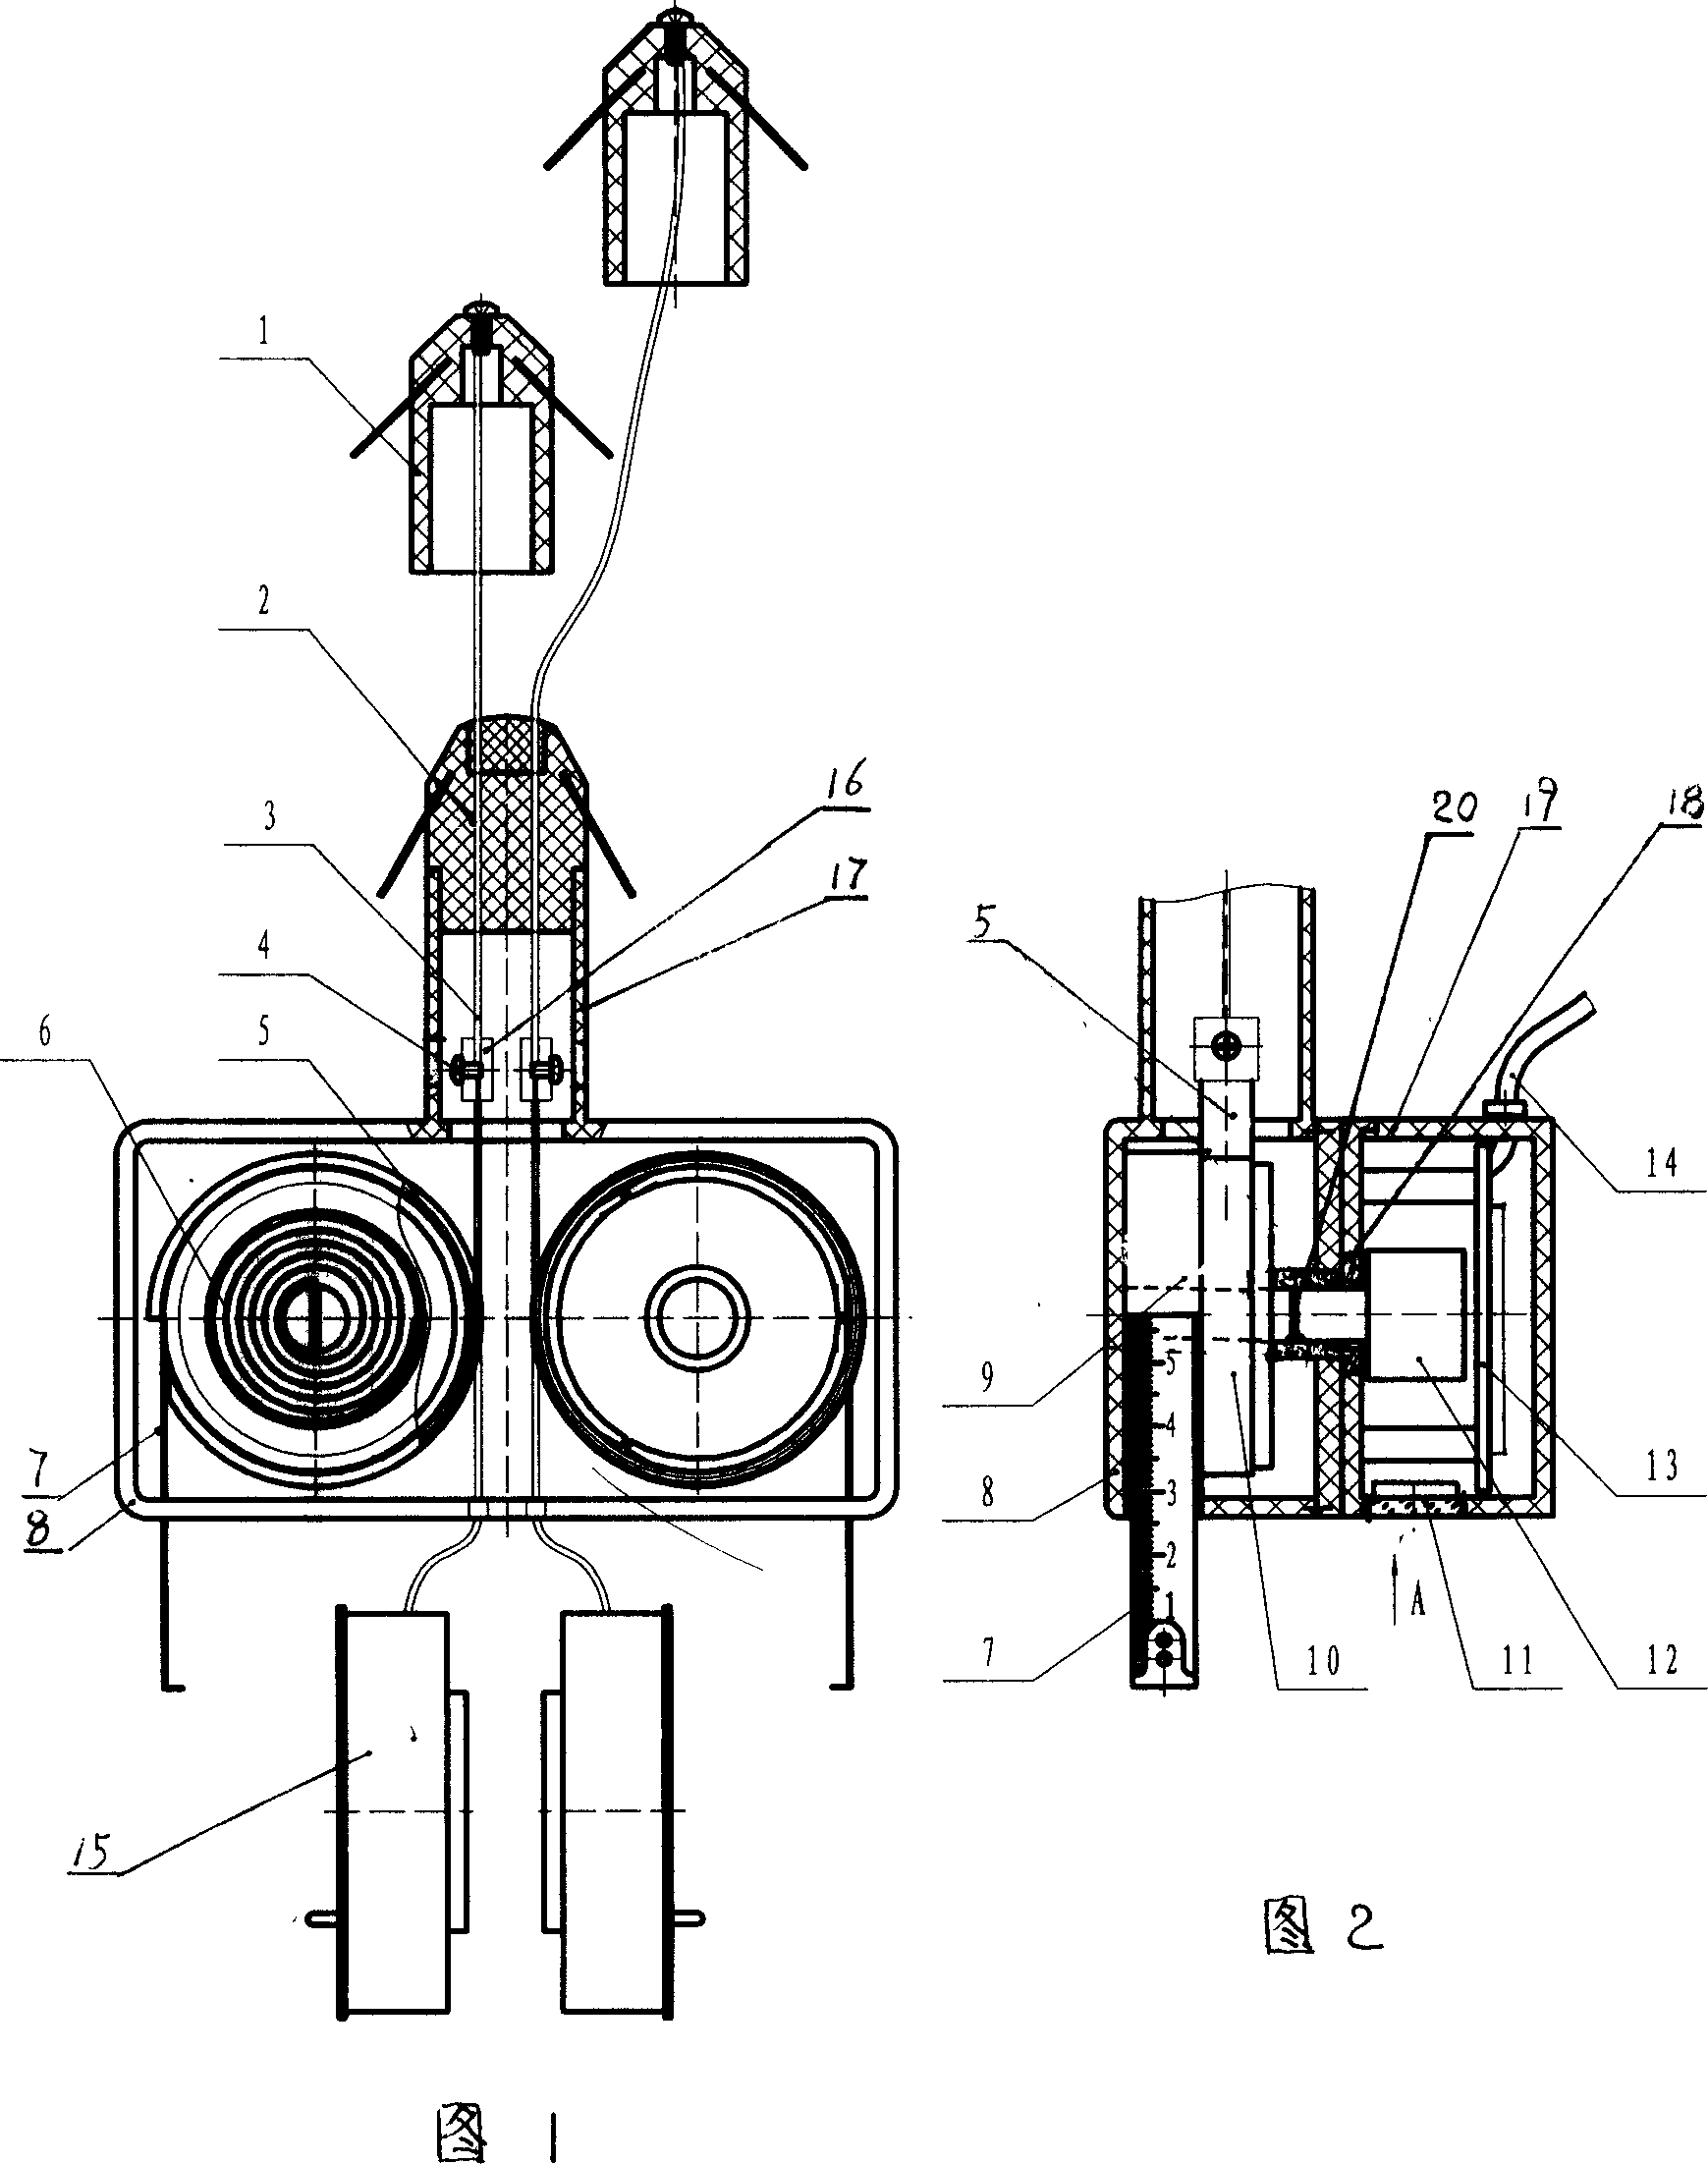 Surrounding rock, bed separation monitor with multiple azimuths and double functions